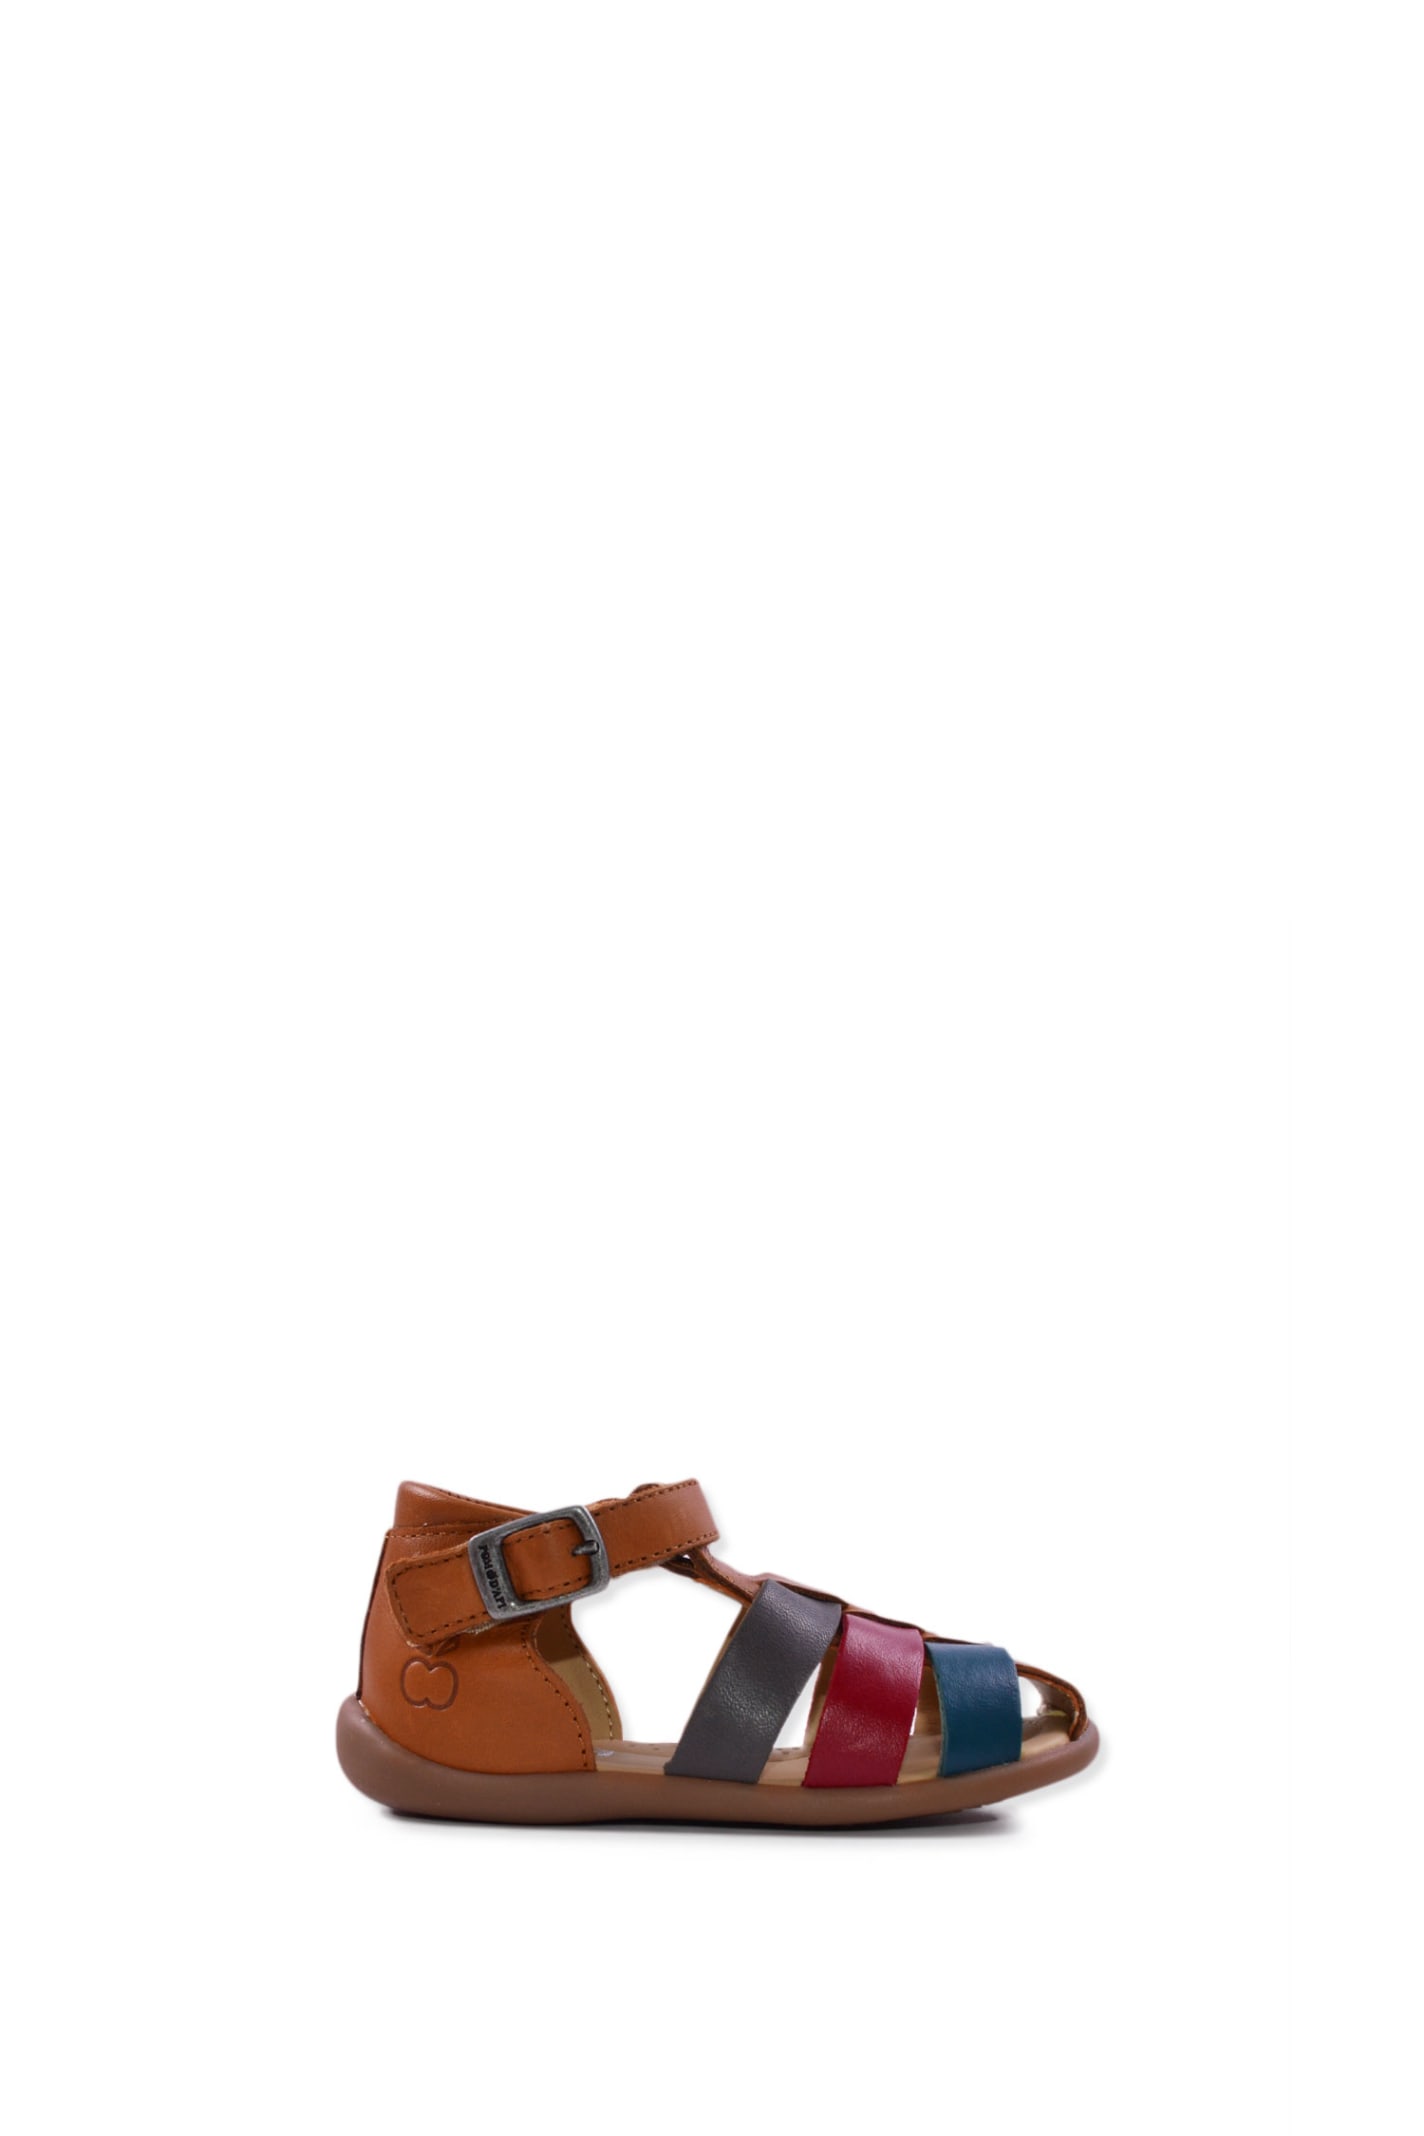 Pom D'api Kids' Sandals In Colored Leather In Brown